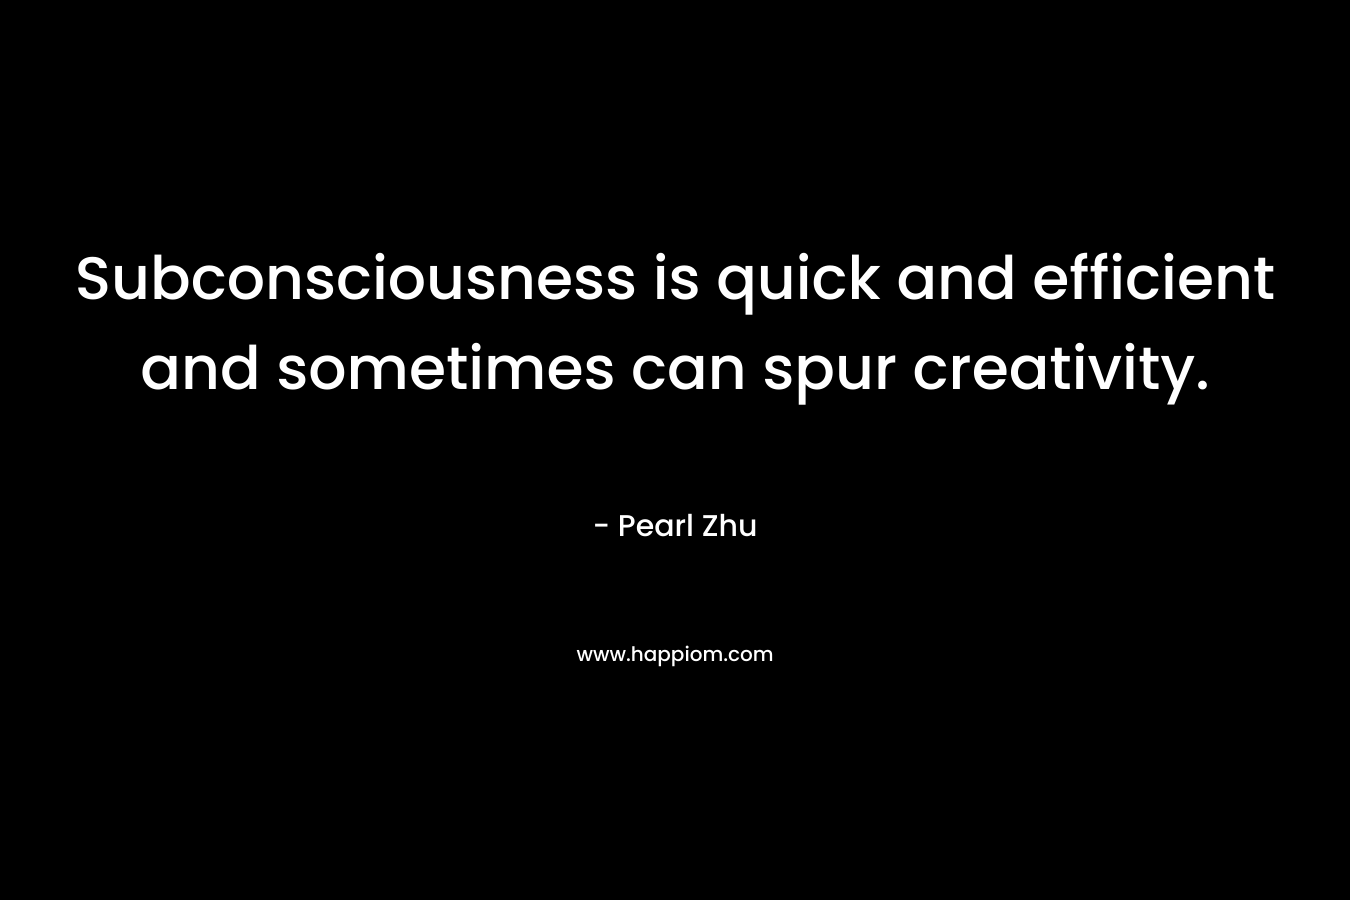 Subconsciousness is quick and efficient and sometimes can spur creativity. – Pearl Zhu